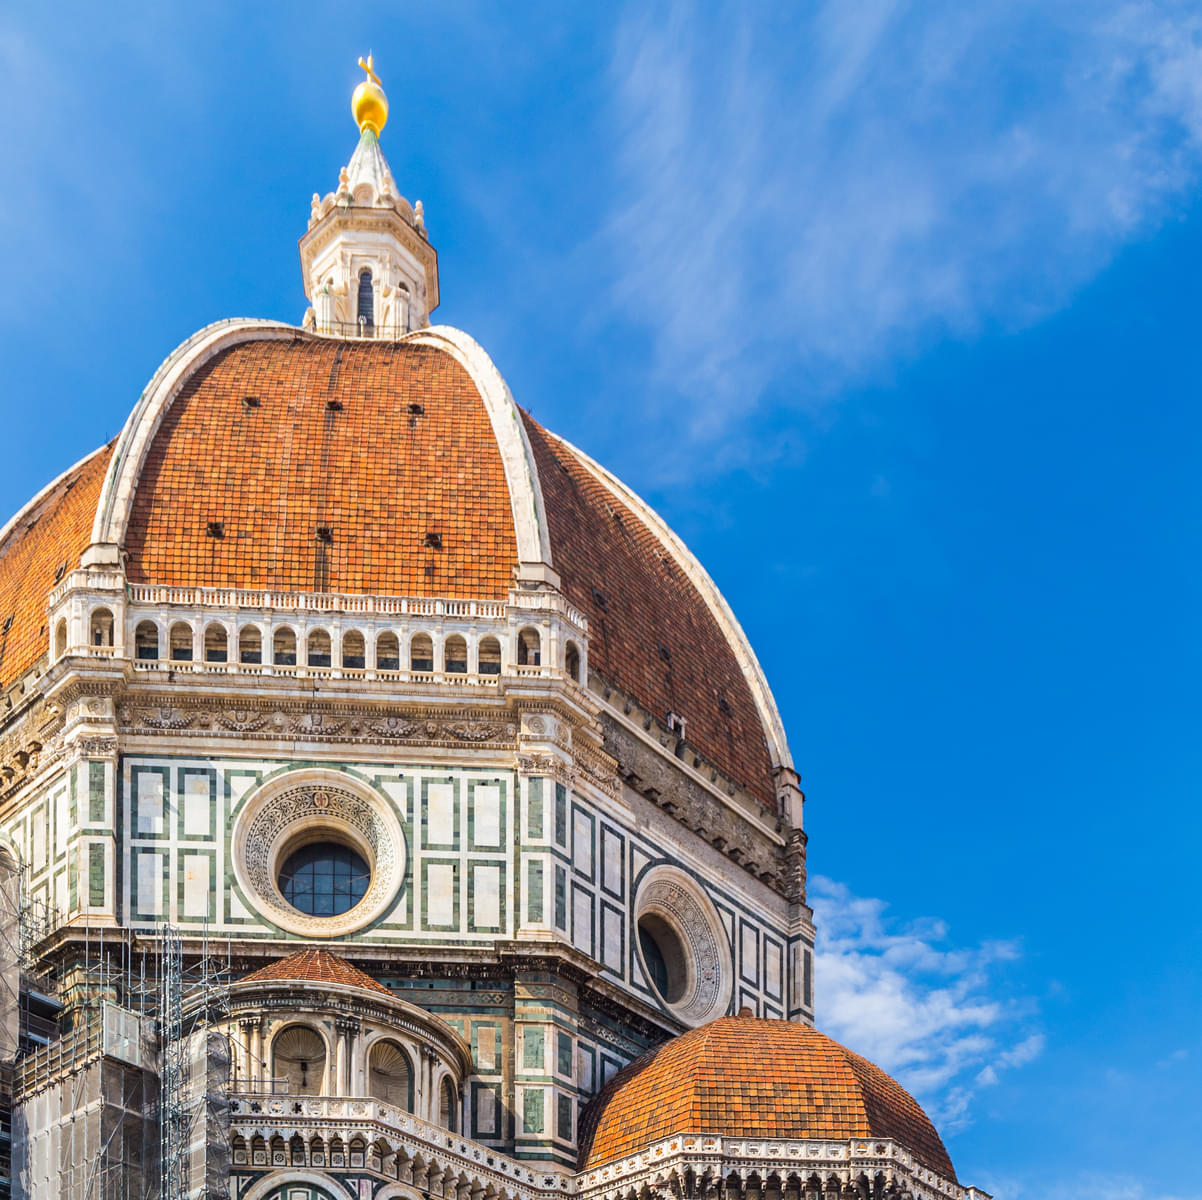 The Dome Of The Duomo Is The Largest Brick & Mortar Dome In The World